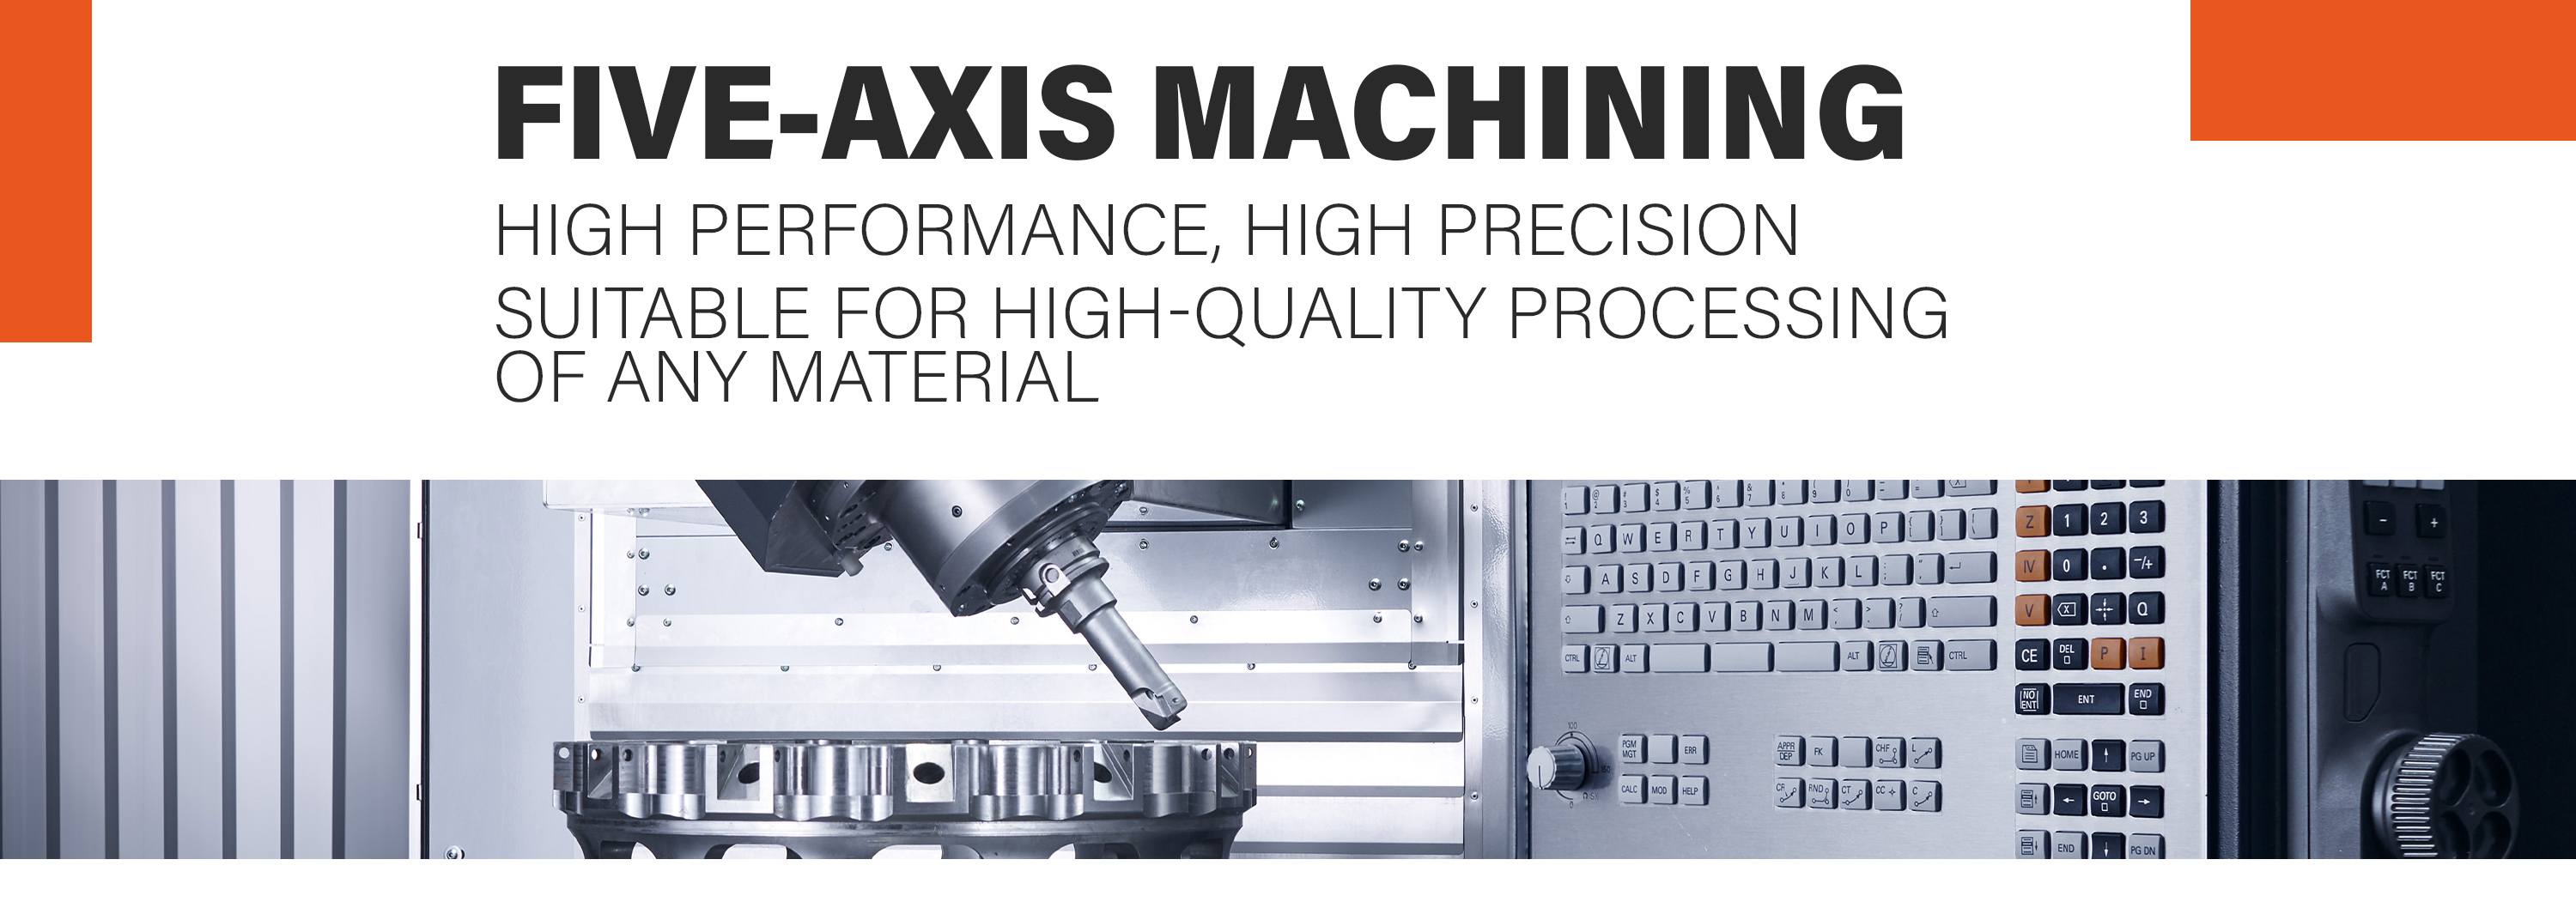 Five-axis Machining center